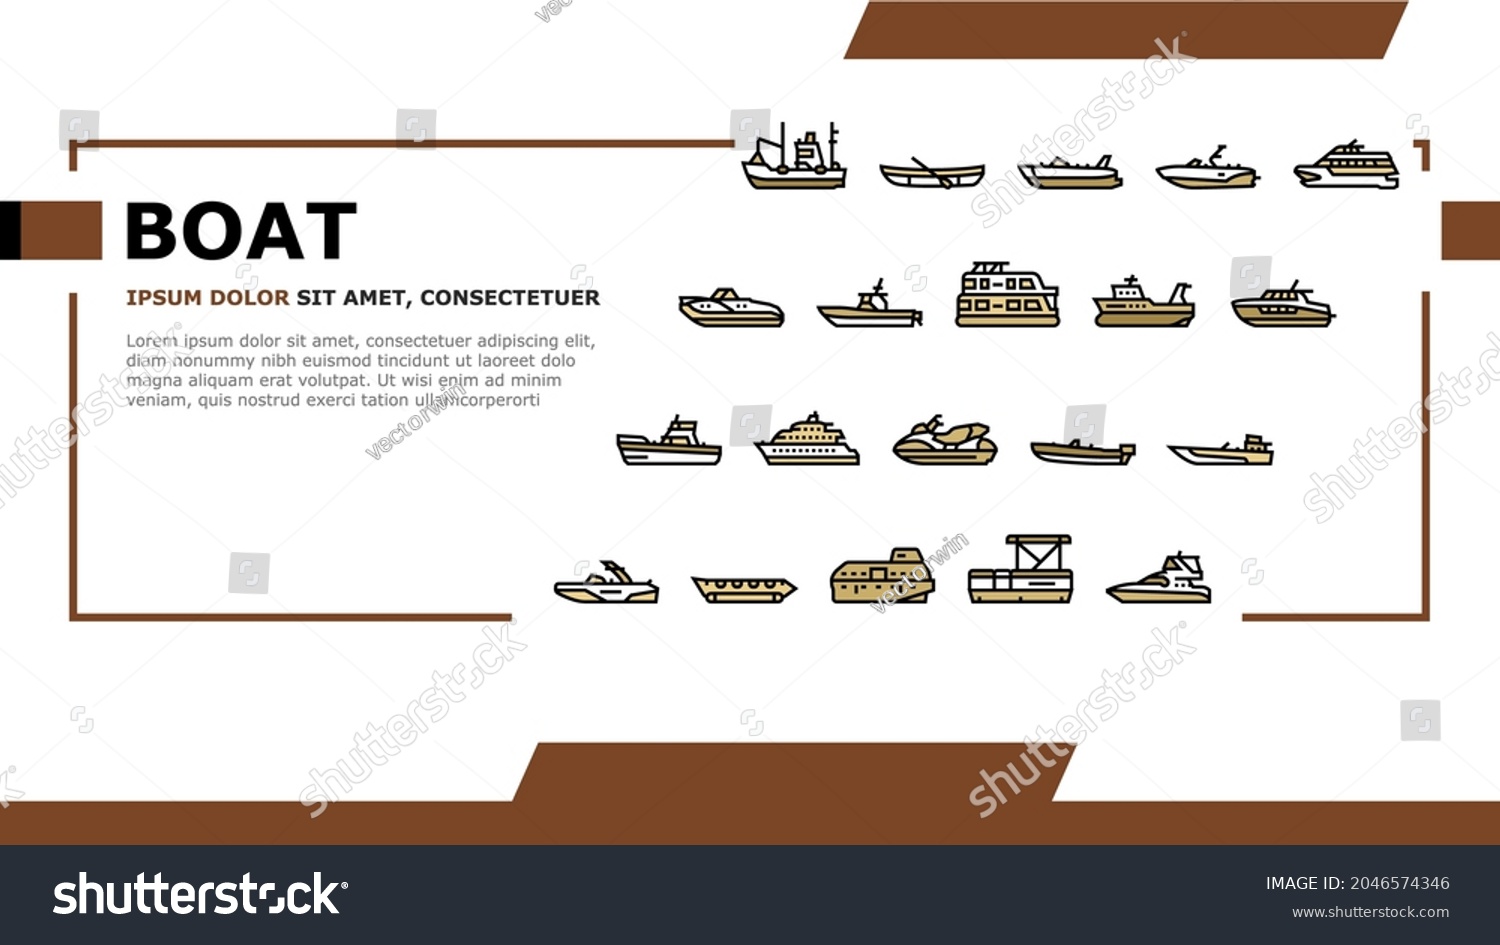 SVG of Boat Water Transportation Types Landing Web Page Header Banner Template Vector. Runabout And Catamaran, Fishing And Bowrider, Motor Yacht And Cabin Cruiser Boat Illustration svg